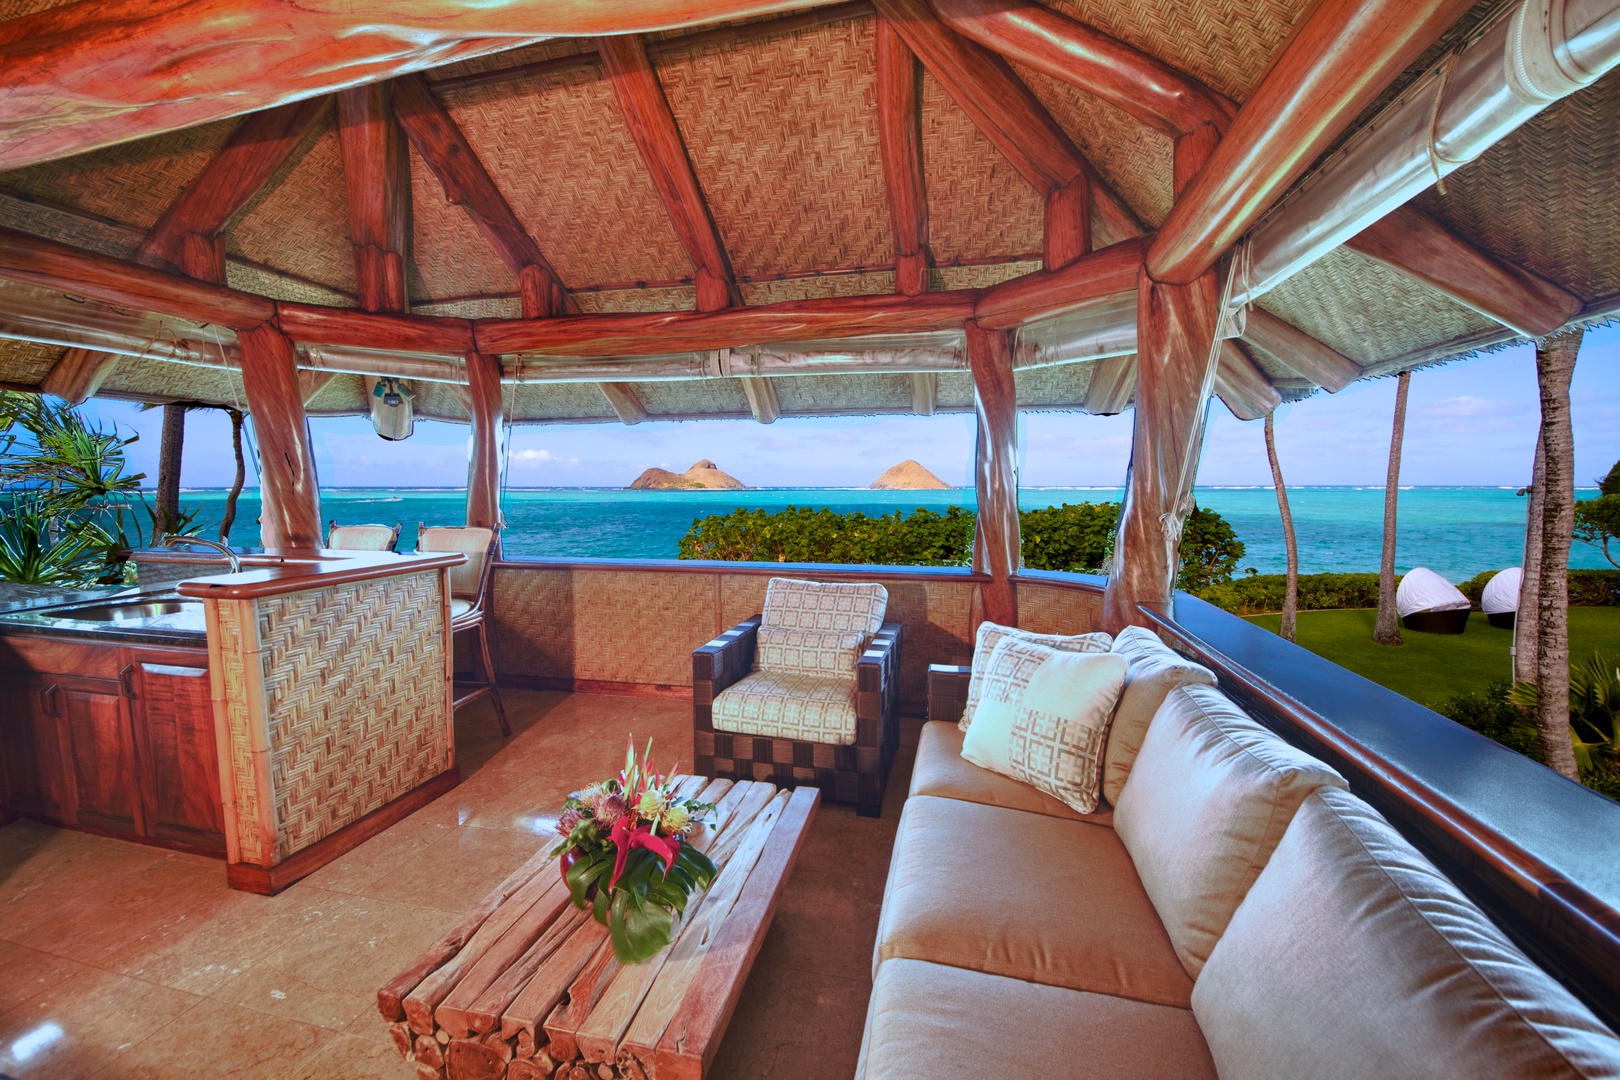 Kailua Vacation Rentals, Paul Mitchell Estate- 5 Bedroom* - Open-air Lounge (or "Crow's Nest") on upper level of Boat House